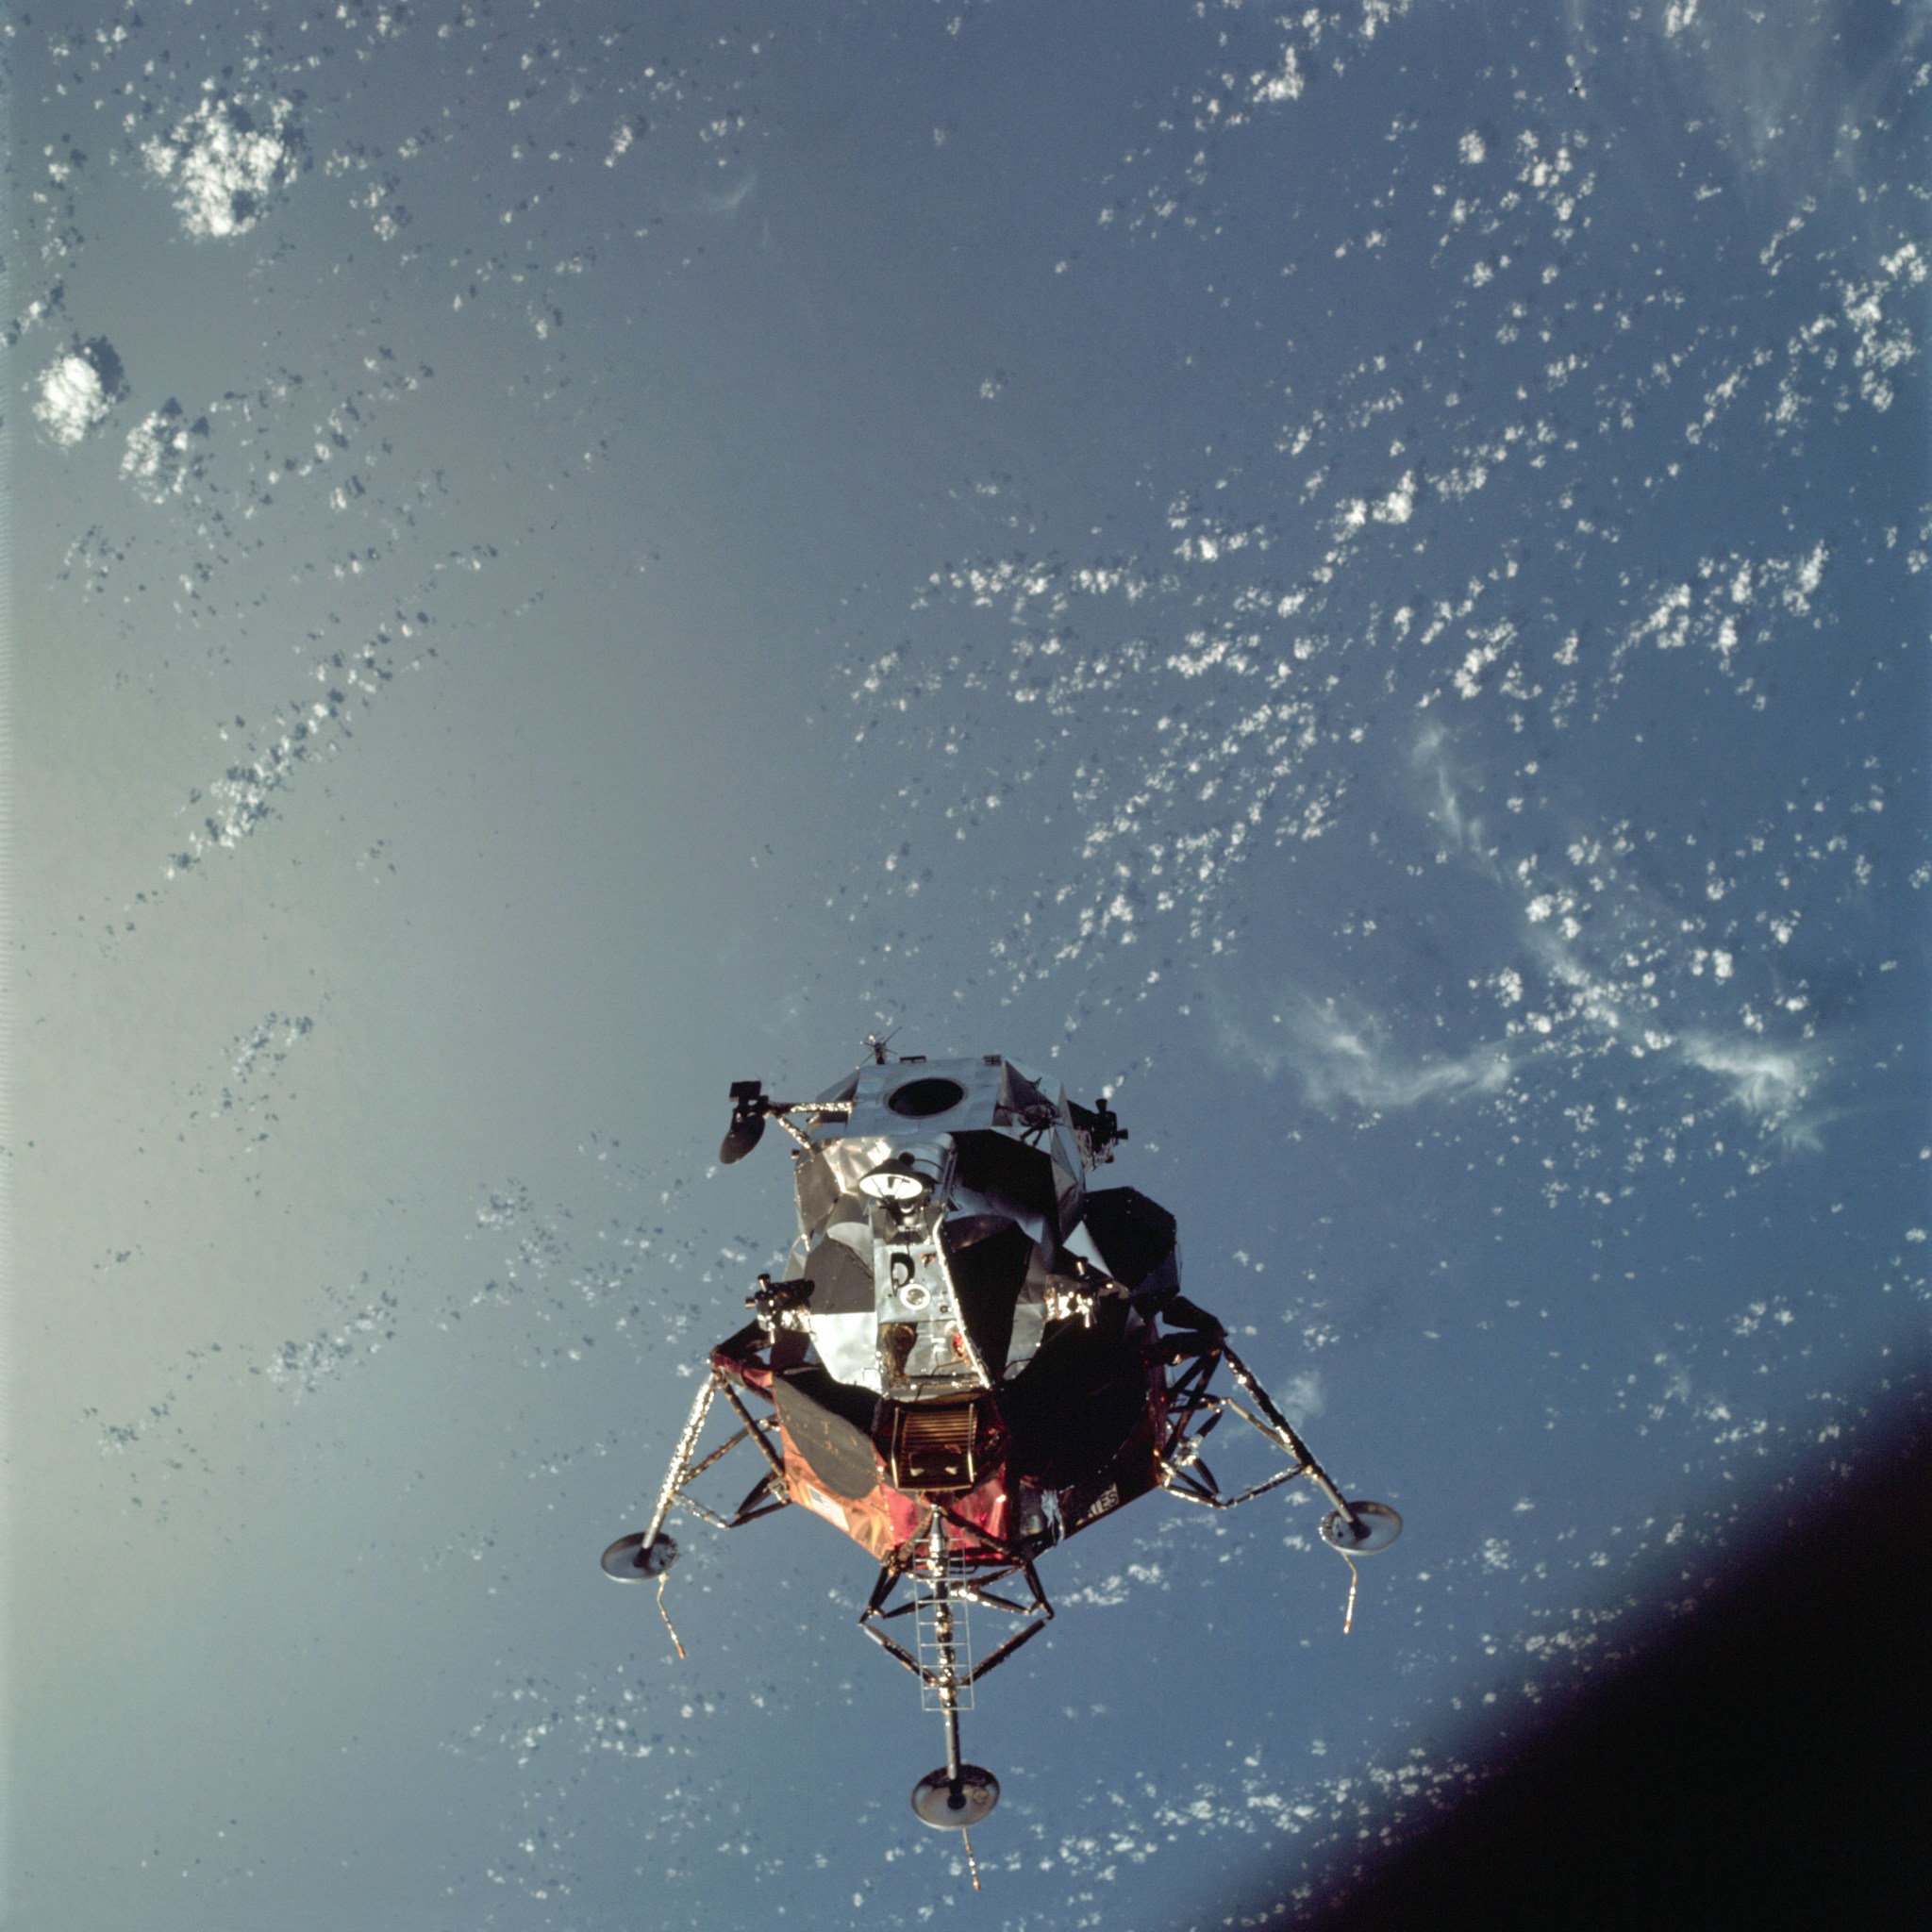 A view of the Apollo 9 lunar module, nicknamed Spider, in a lunar landing configuration above Earth.